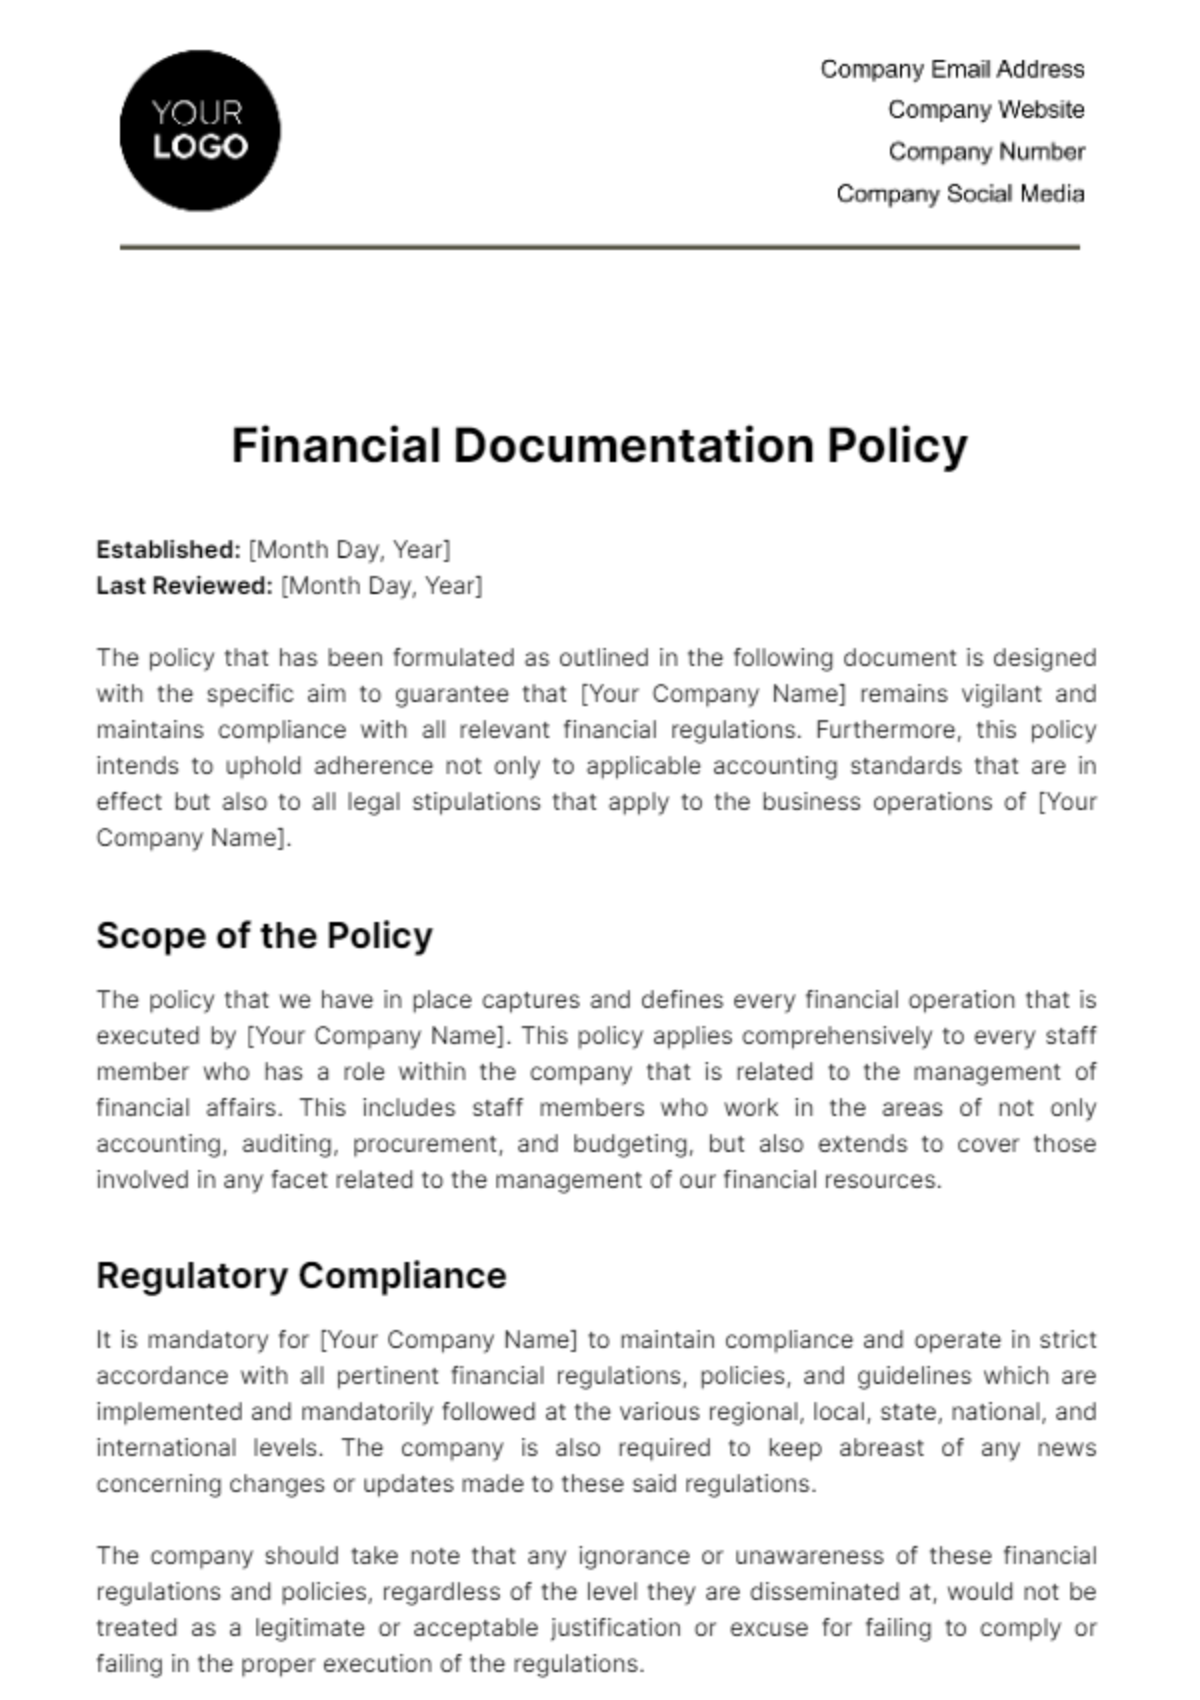 Financial Documentation Policy Template